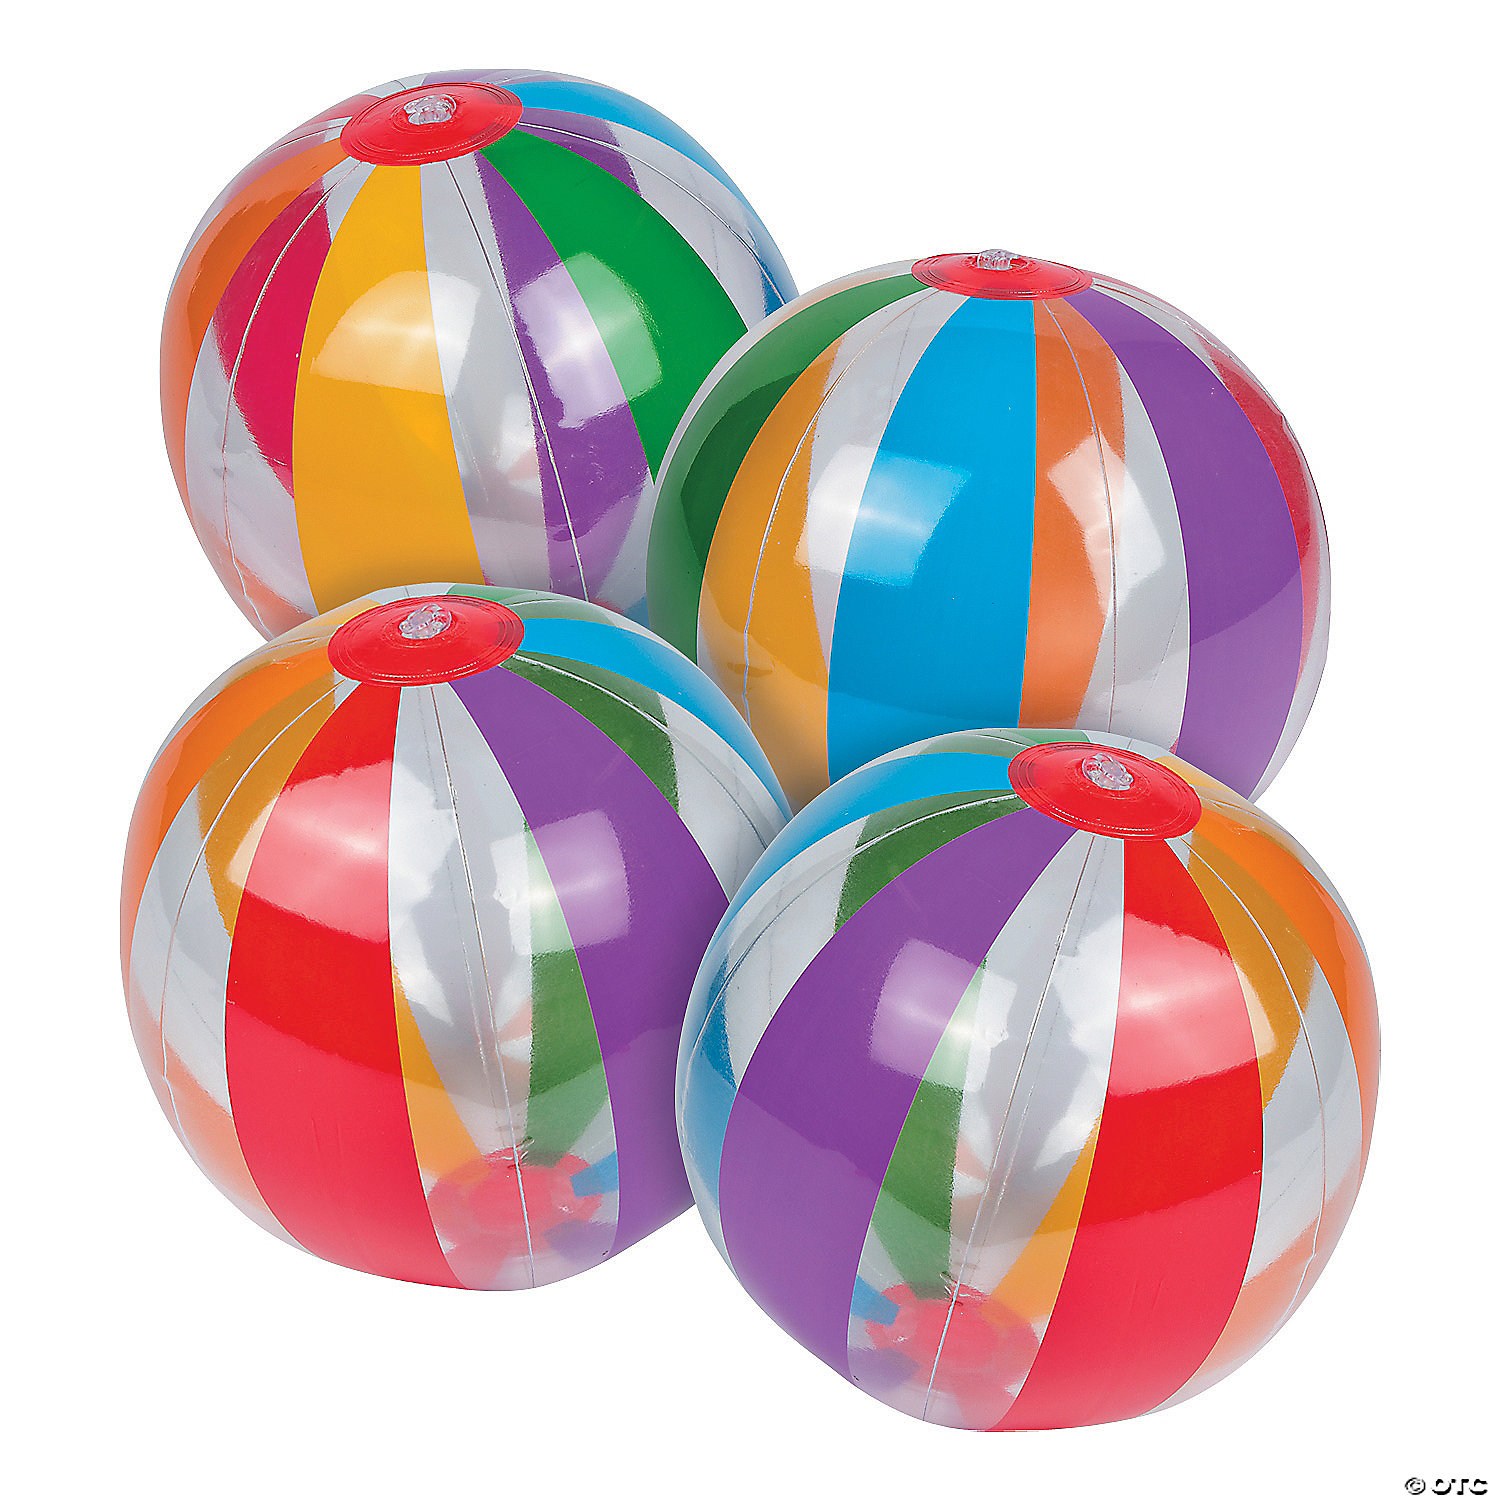 4 Large Inflatable Multi Colored Beach Balls 22" Pool Beachball Party Favors for sale online